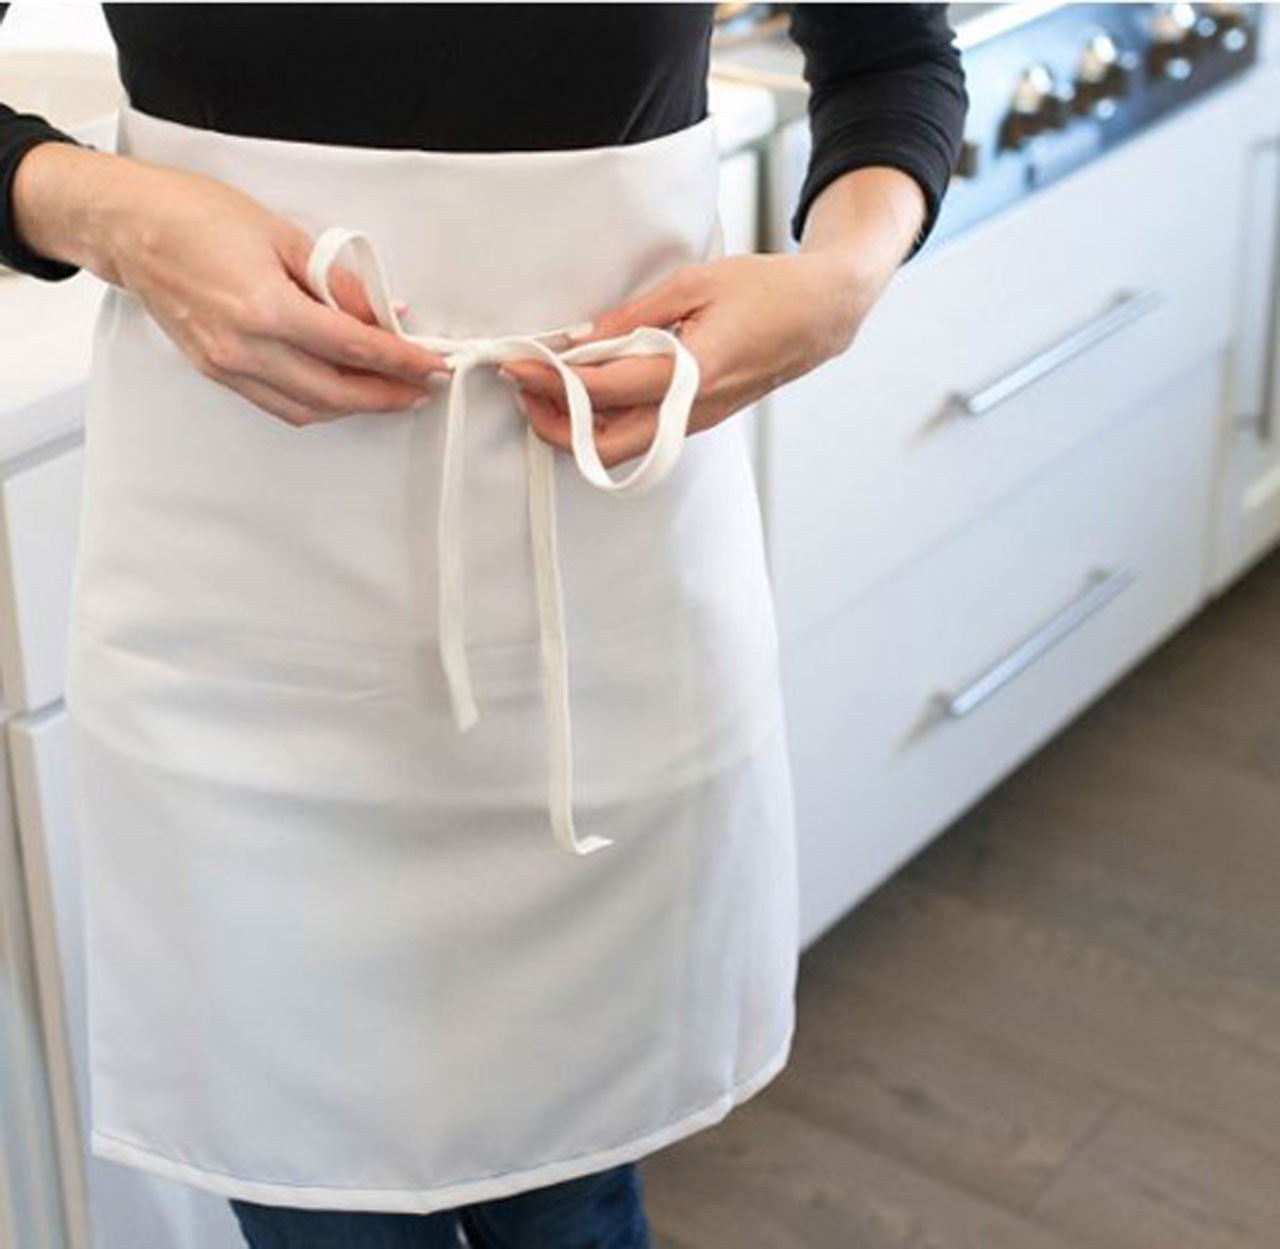 Does the 4-Way, Reversible cooking aprons have what type of ties?